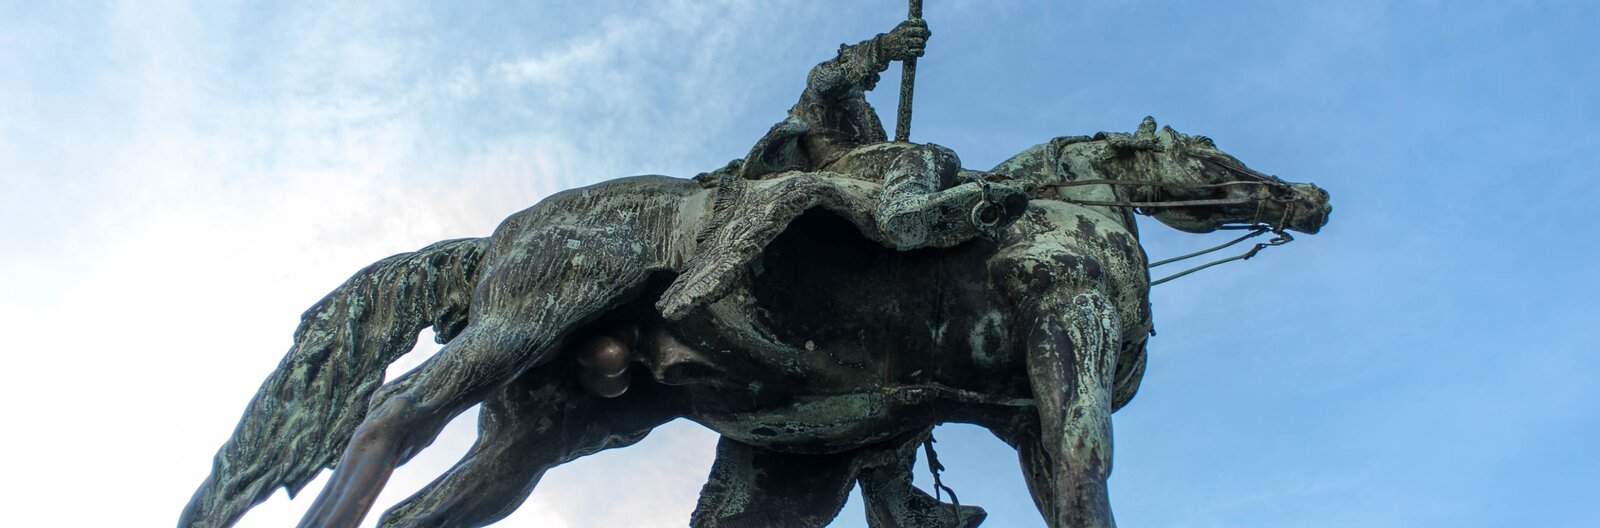 5 Budapest statues that bring good luck when you touch them